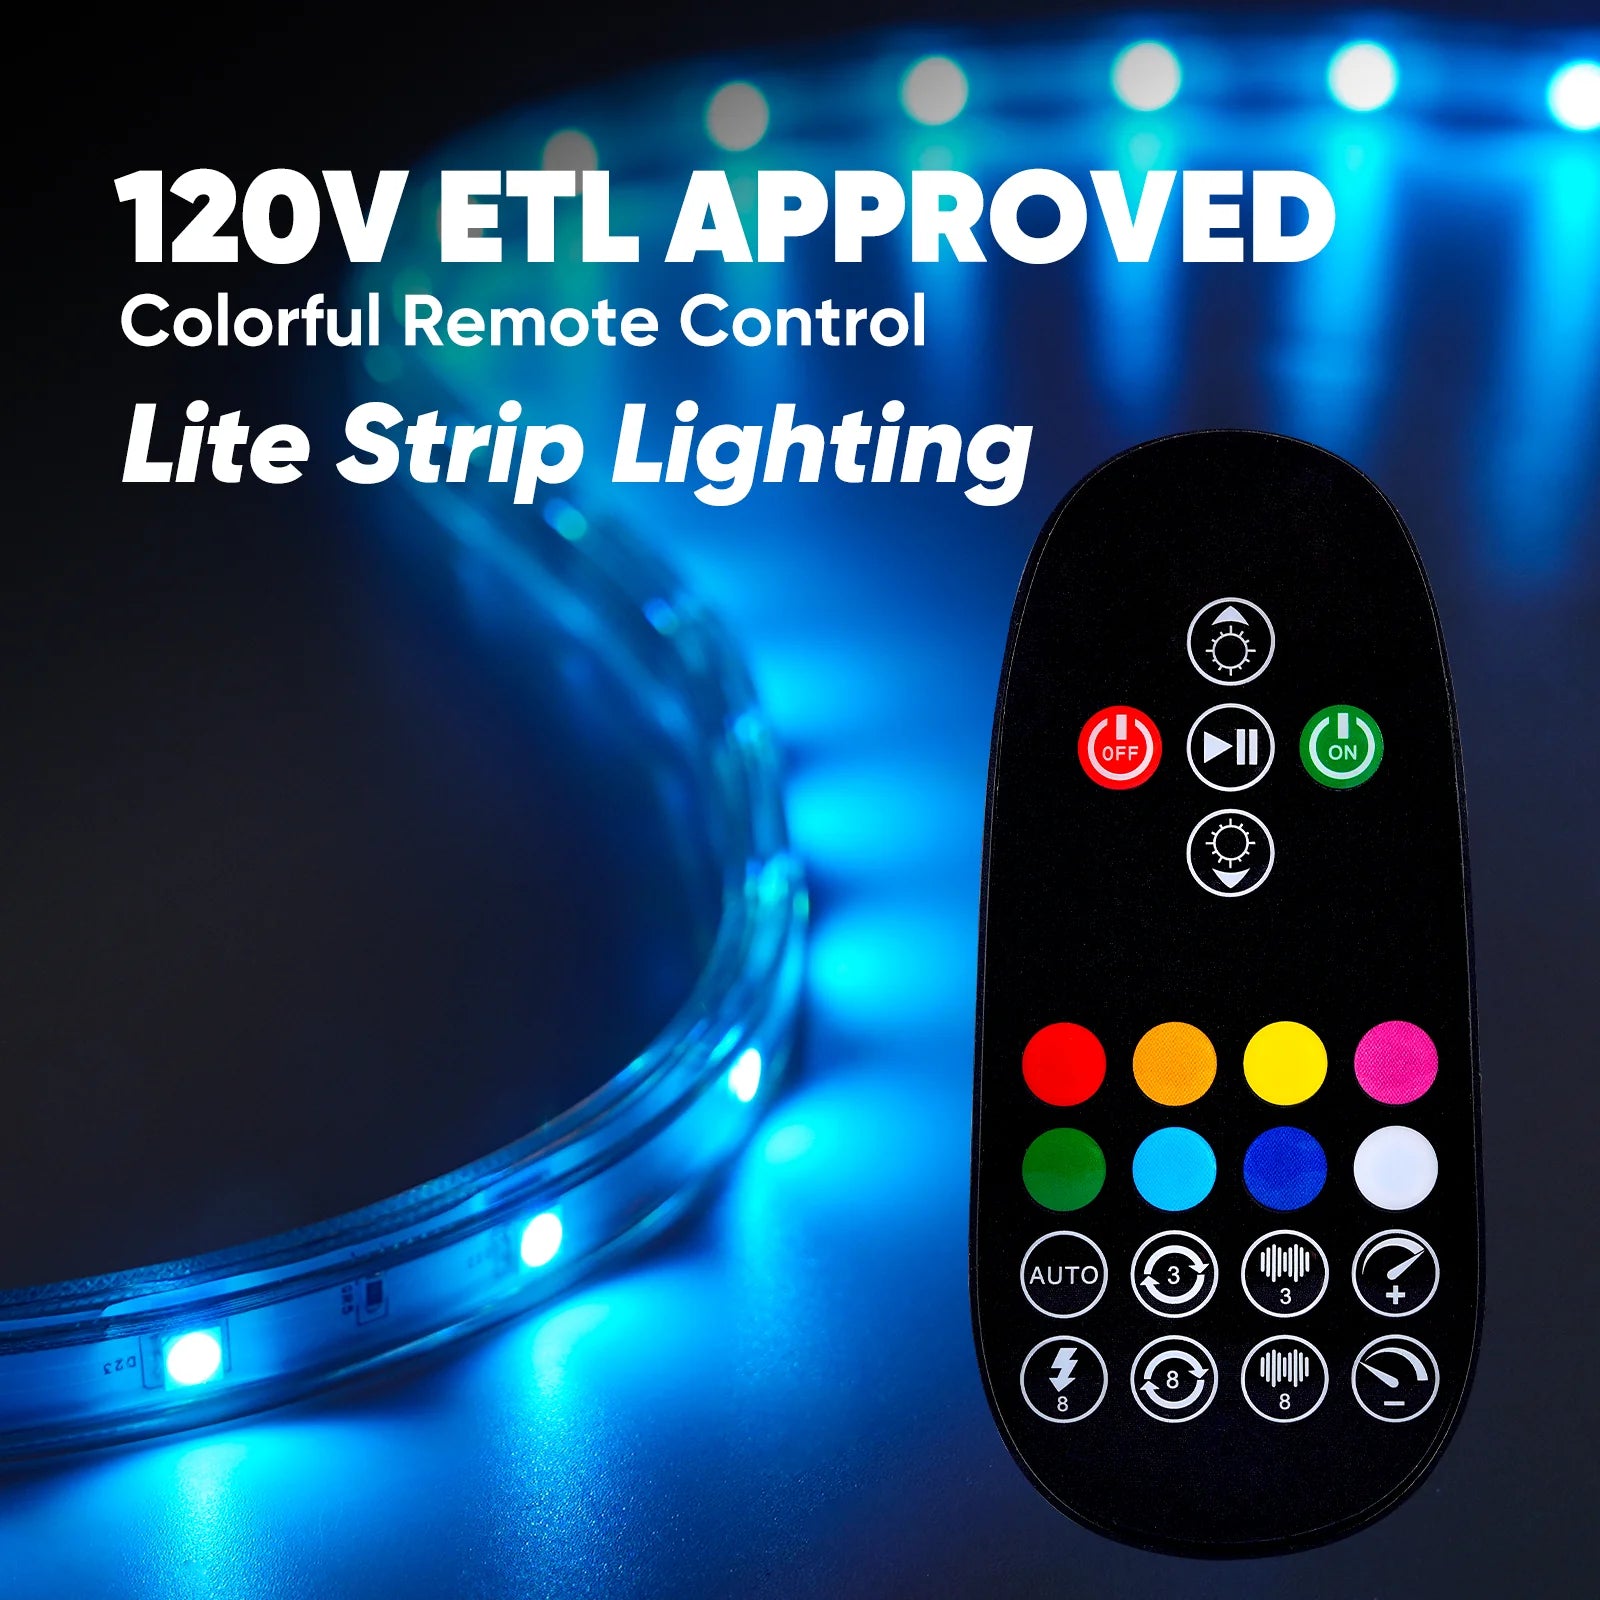 110V Dimmable RGB LED Strip Light - Soft Ambient Lighting for Bedroom, Kitchen, Home Decor - 180 Lumens